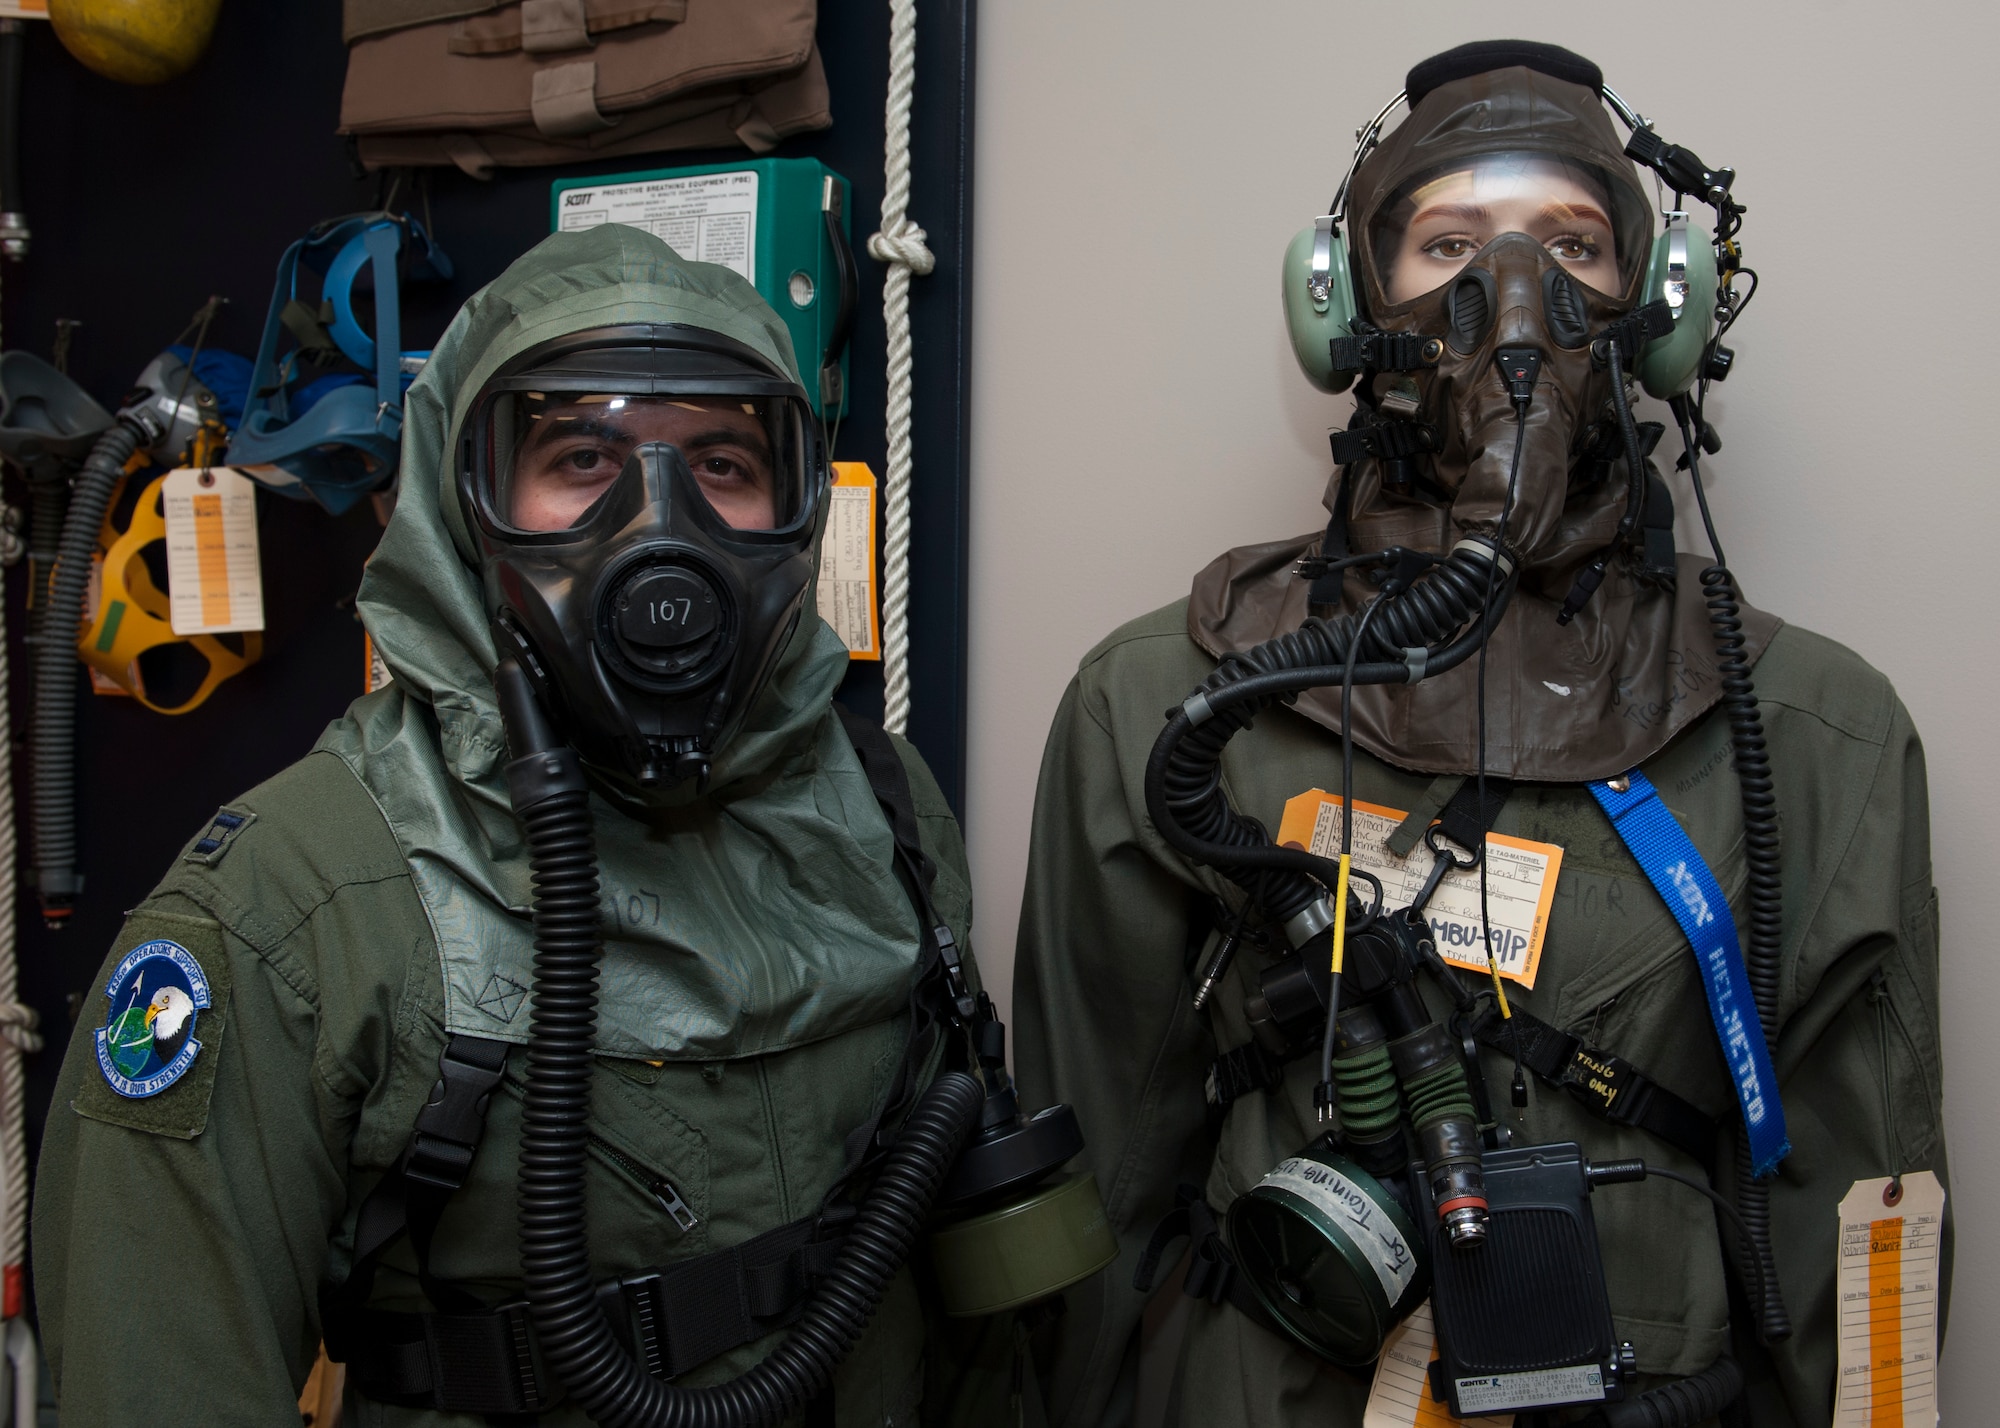 Capt. Edward Silva, 436th Operations Support Squadron Aircrew Flight Equipment commander, poses while wearing the XM69 Aircrew Chemical, Biological, Radiological and Nuclear Defense (CBRN) system while standing next to a mannequin wearing the legacy U.S. Air Force Aircrew Eye Respiratory Protection (AERP) system March 2, 2016, inside the Aircrew Flight Equipment facility on Dover Air Force Base, Del. These masks are worn by aircrew members in the event they are exposed to a chemical, biological, radiological or nuclear environment. (U.S. Air Force photo/Senior Airman Zachary Cacicia)